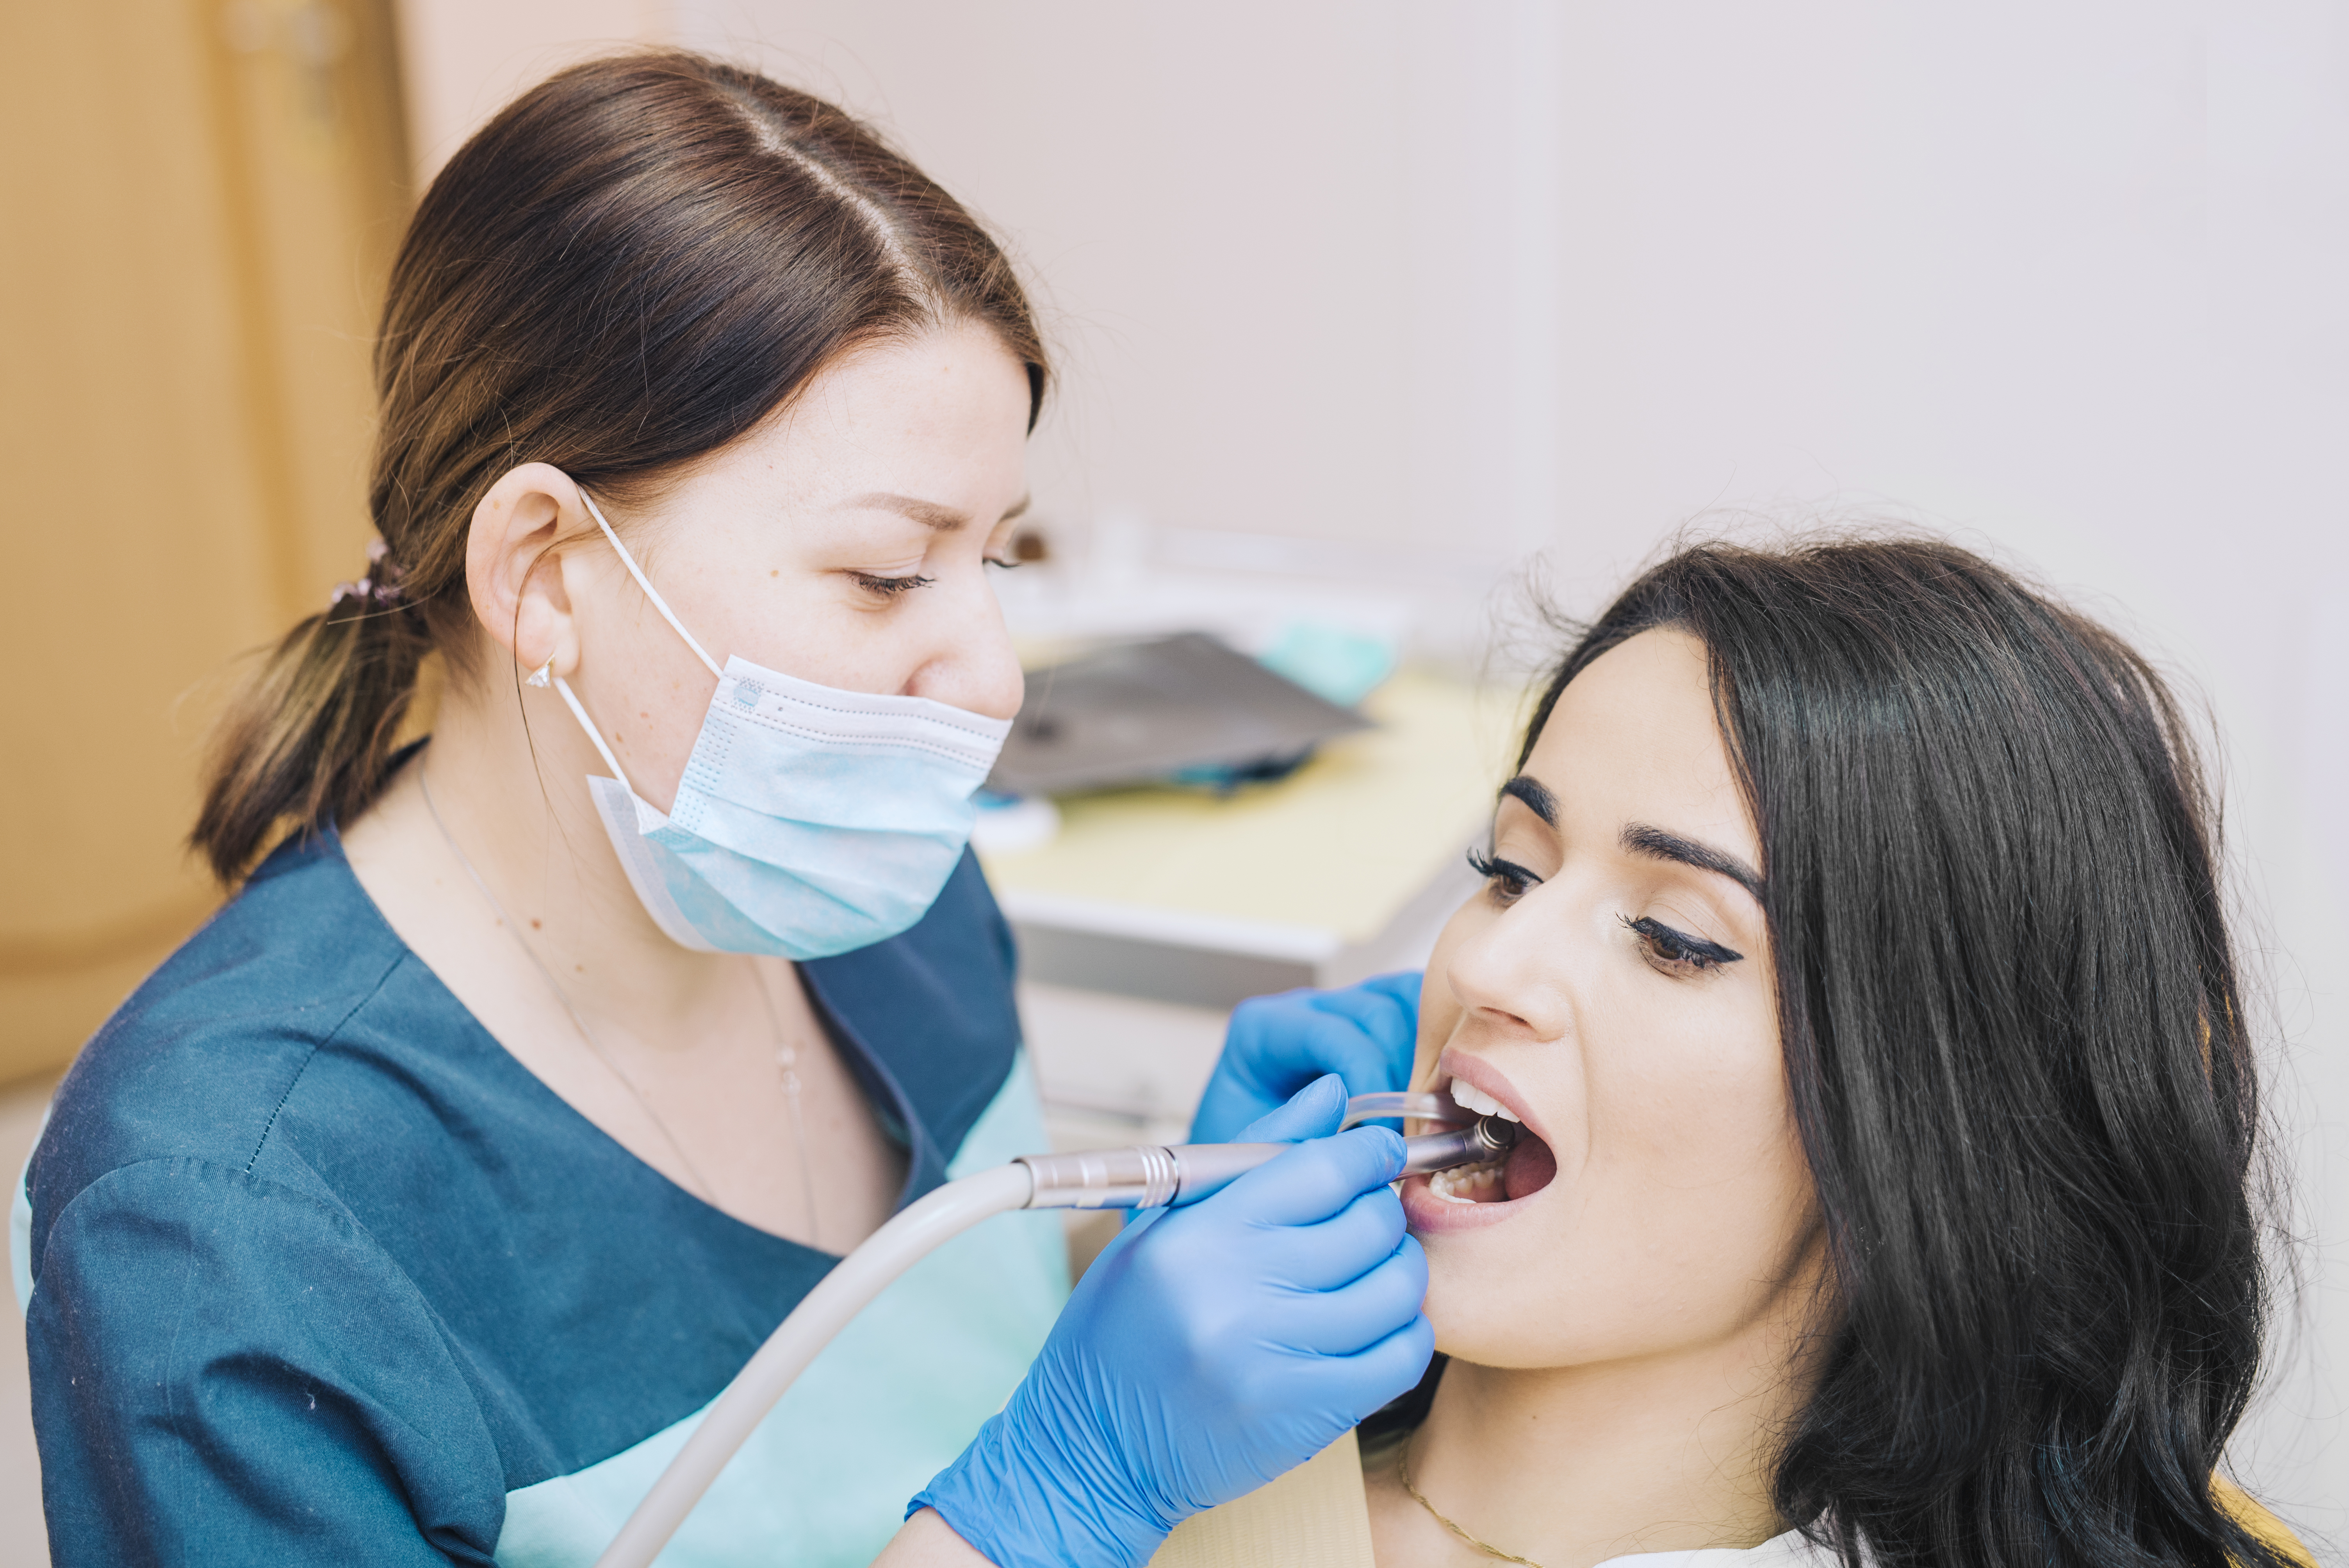 Wisdom Tooth Extraction in Delhi - 32 Strong